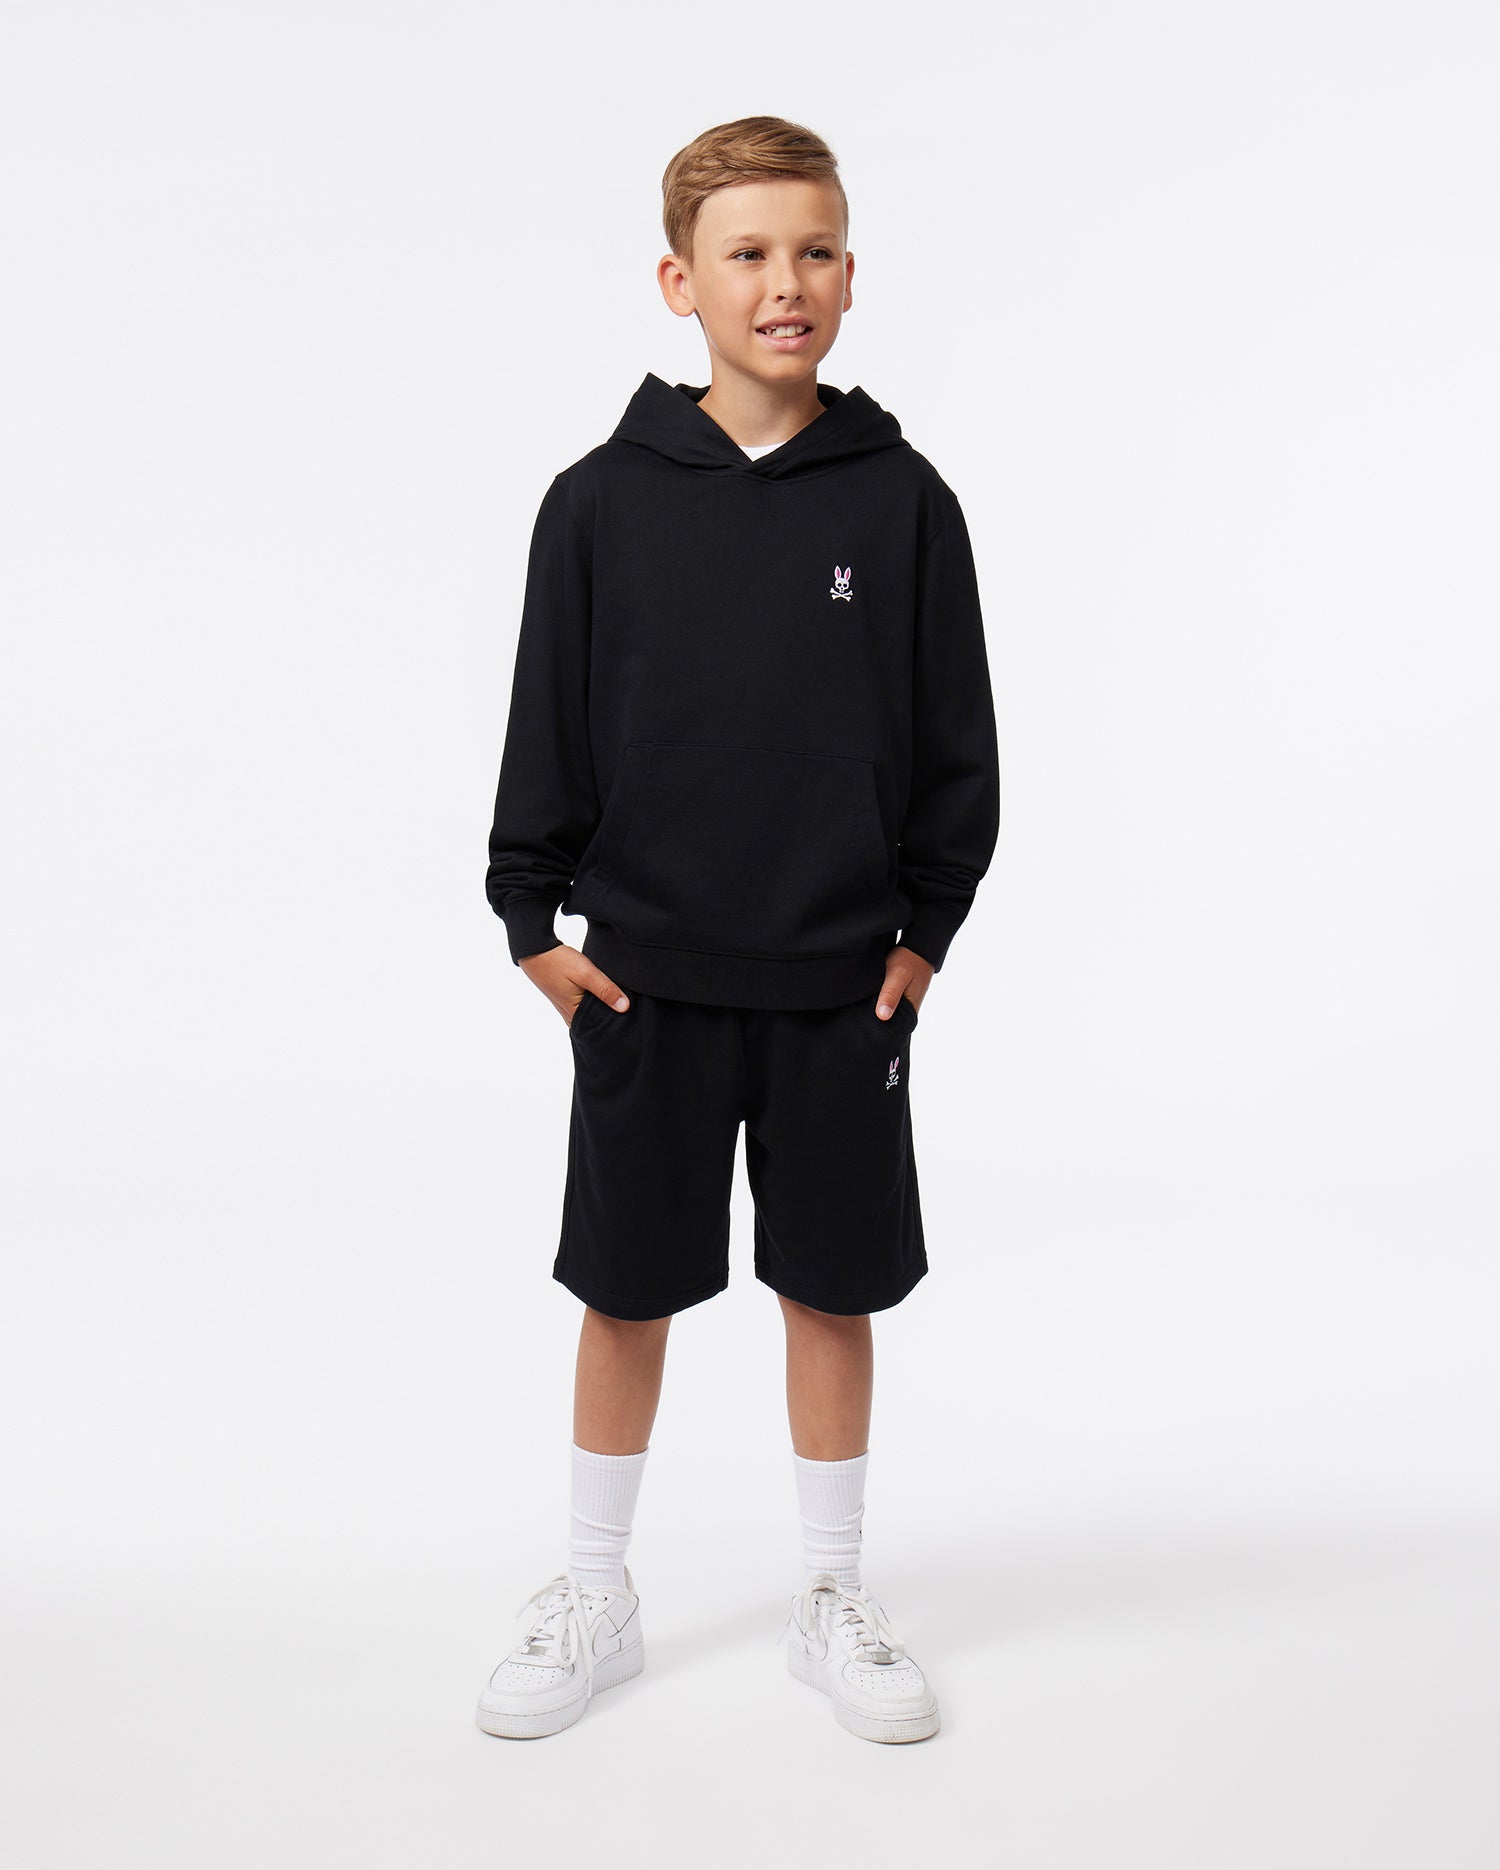 KIDS BLACK FRENCH TERRY PULLOVER HOODIE | PSYCHO BUNNY – Psycho Bunny